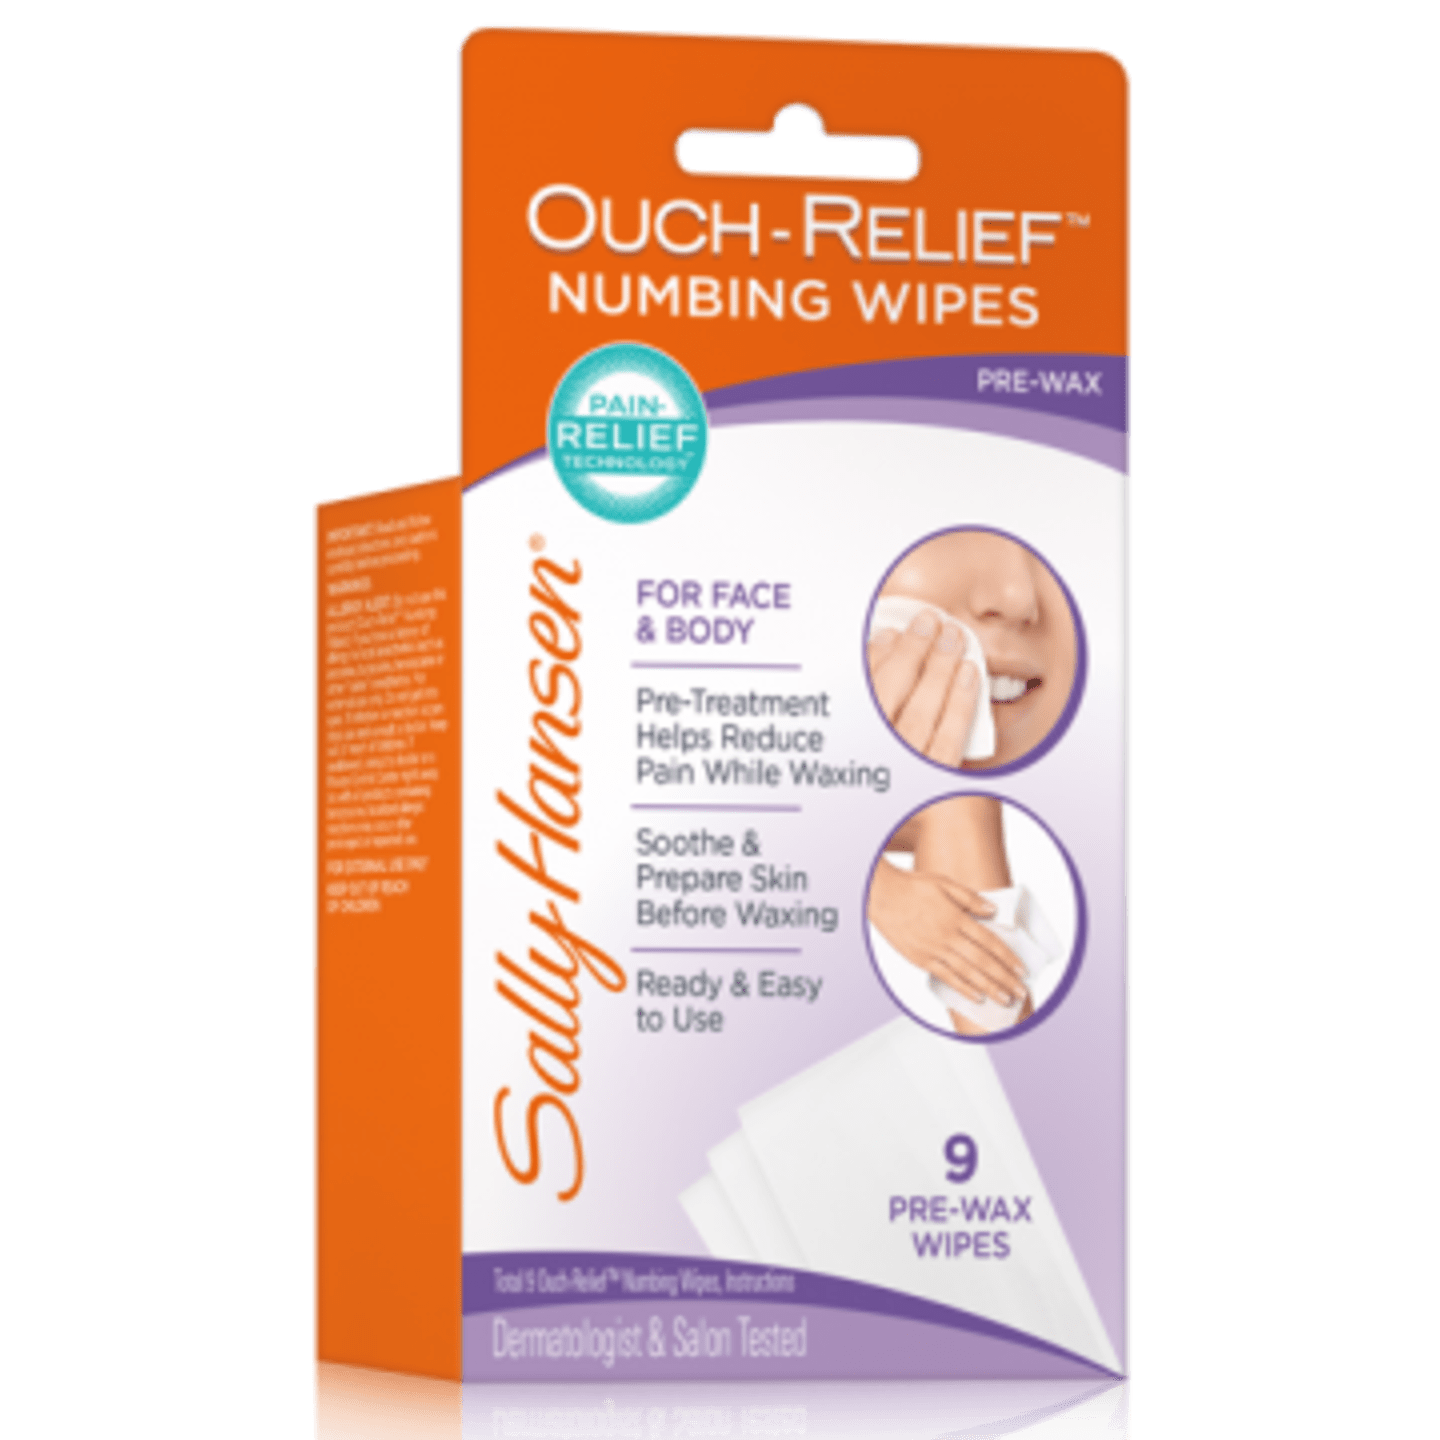 Ouch-Relief Numbing Wipes | Sally Hansen